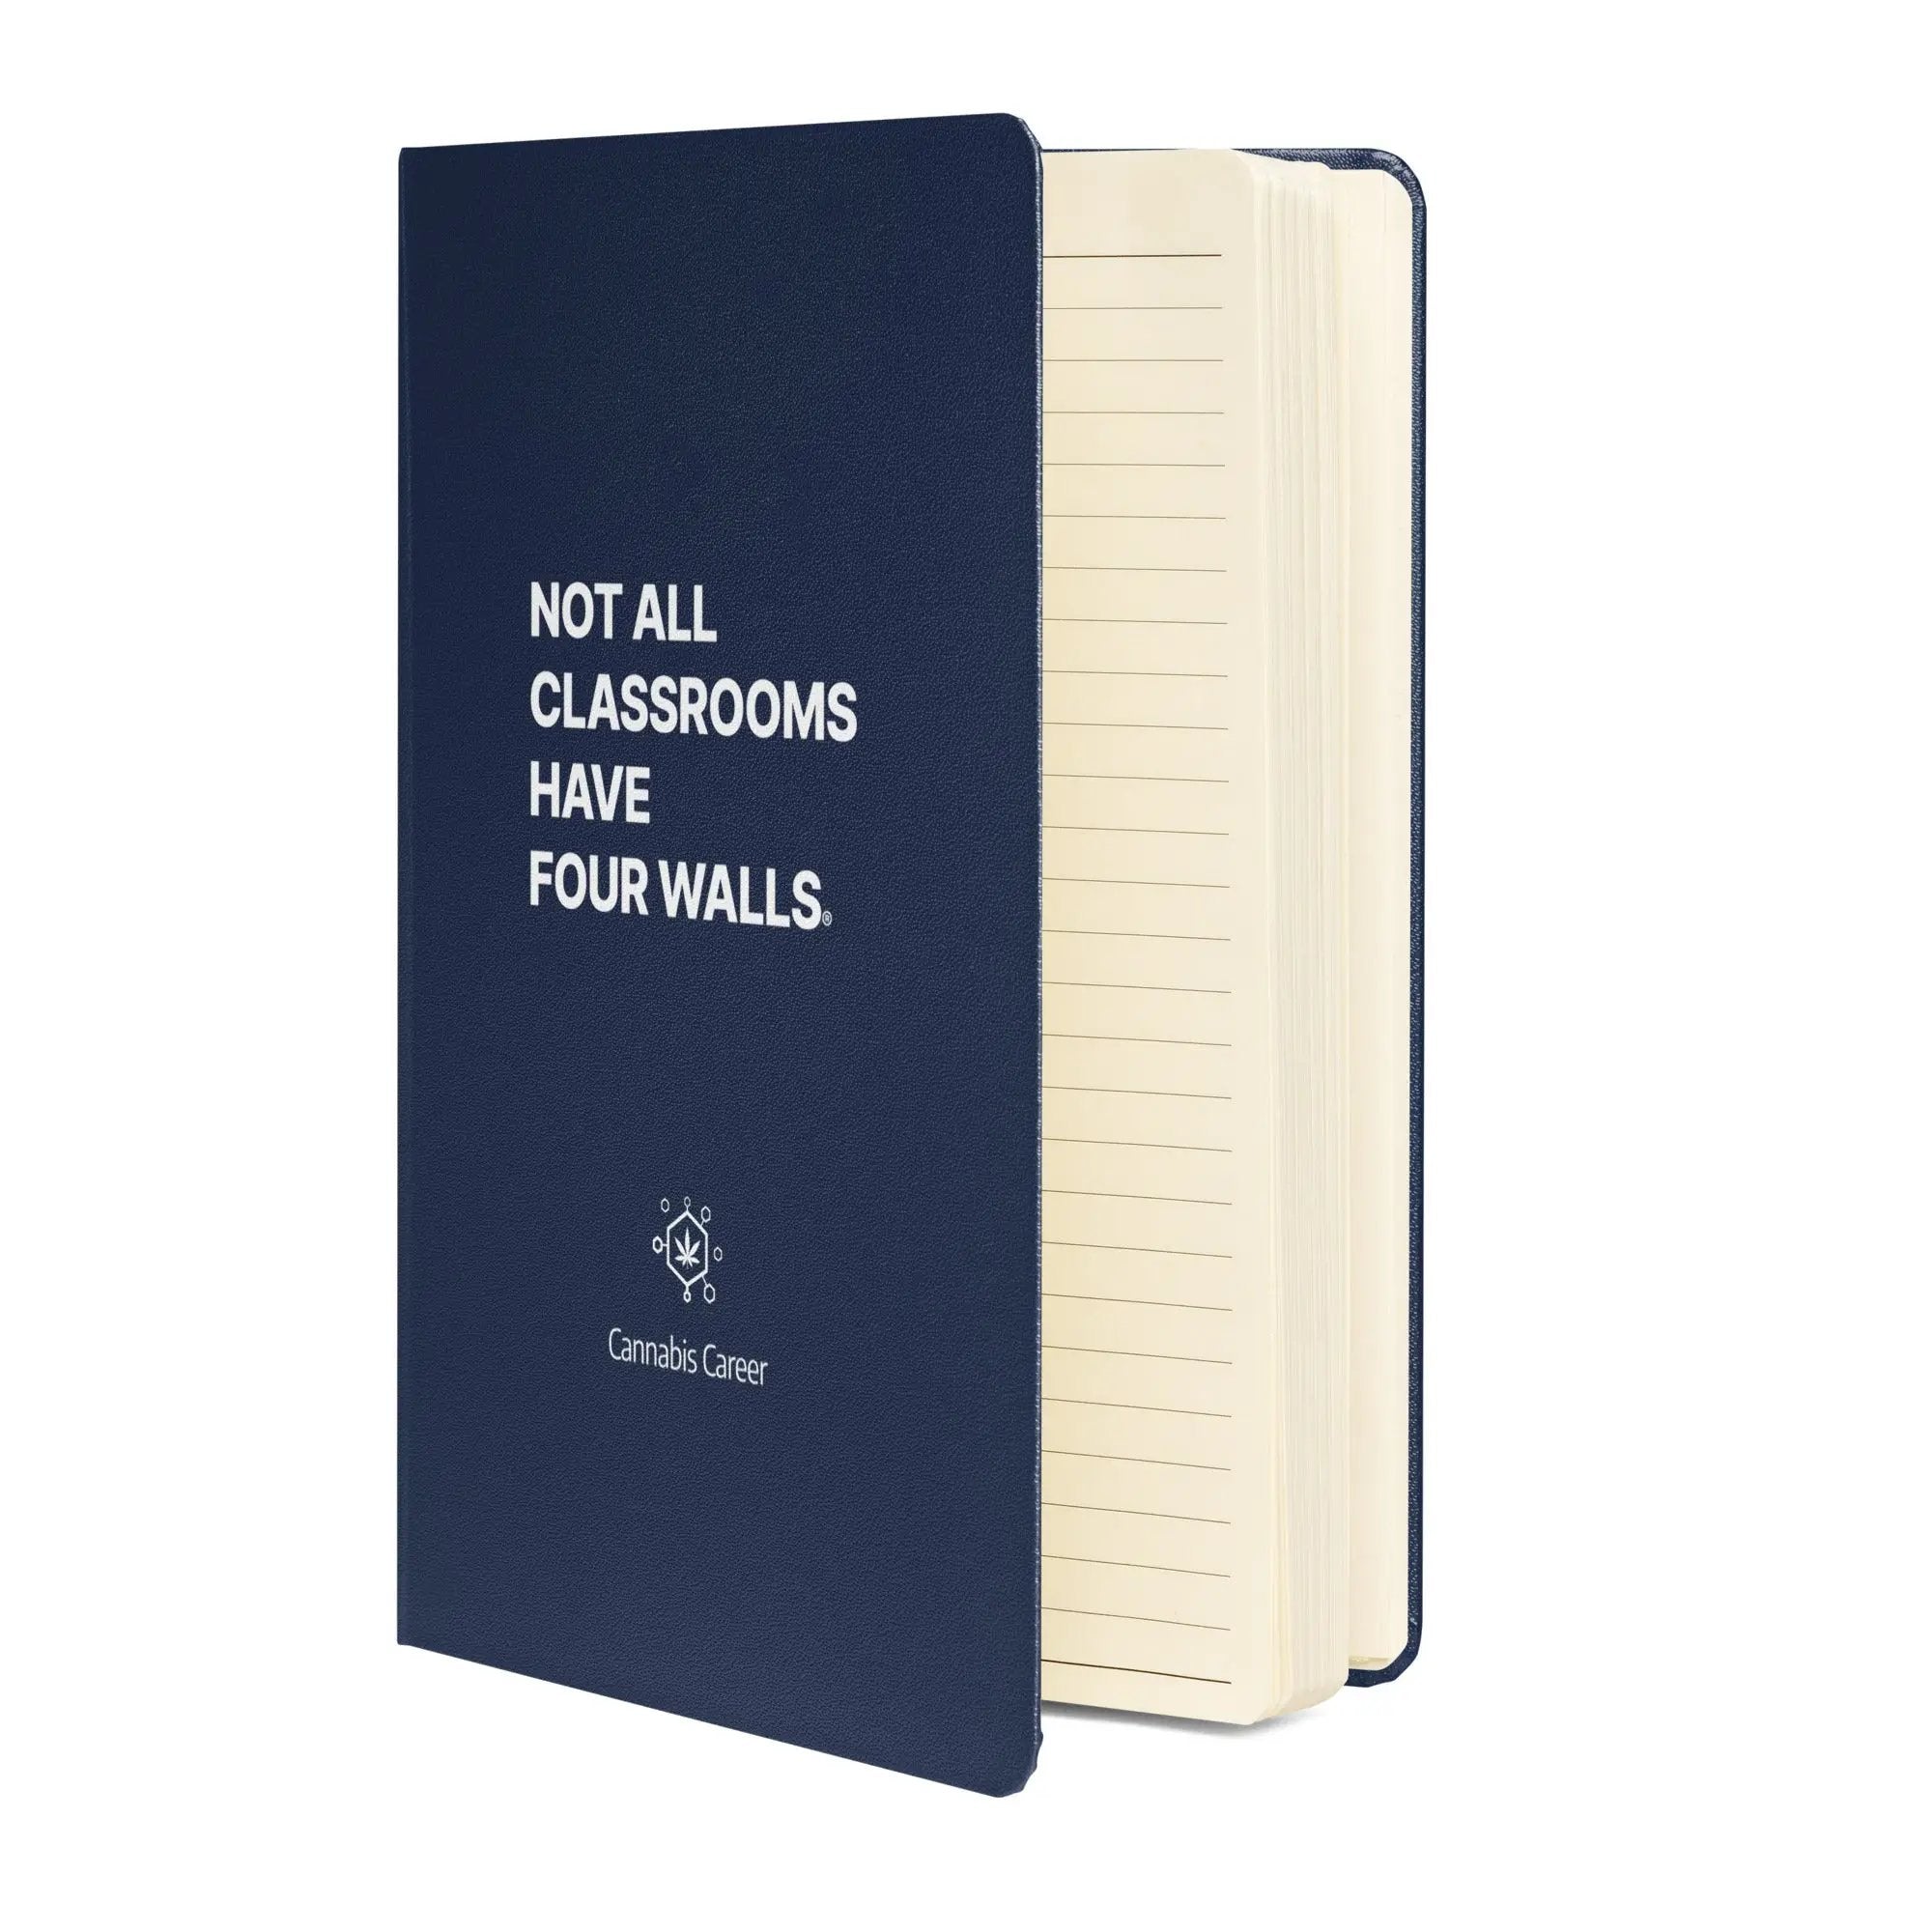 NOT ALL CLASSROOMS HAVE FOUR WALLS® Hardcover Bound Notebook